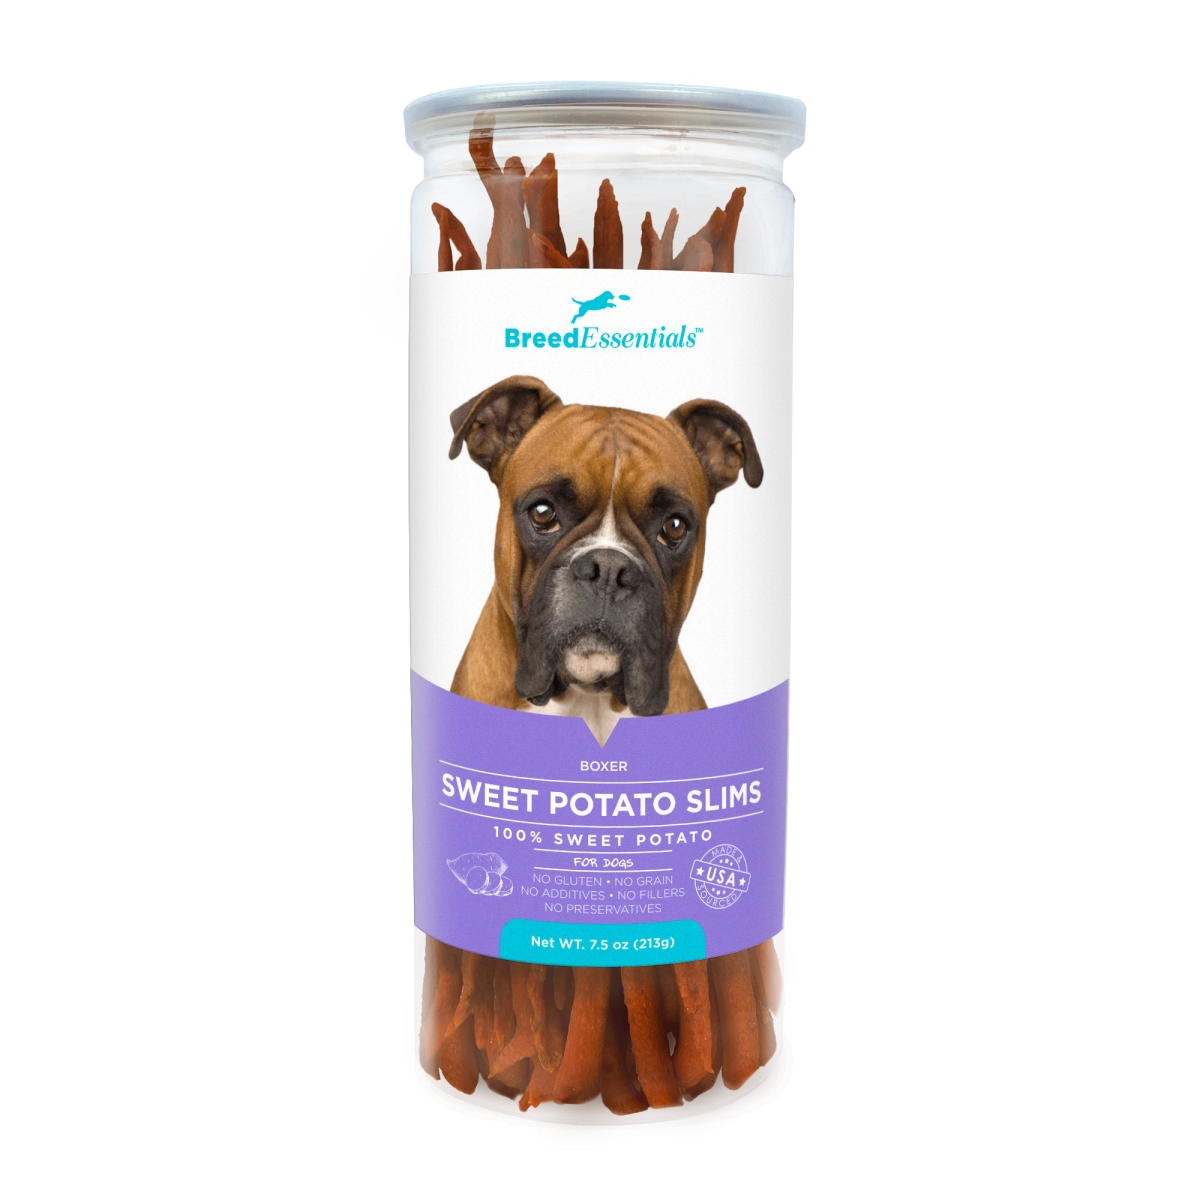 Picture of Breed Essentials 197247000303 7.5 oz Sweet Potato Slims - Boxer